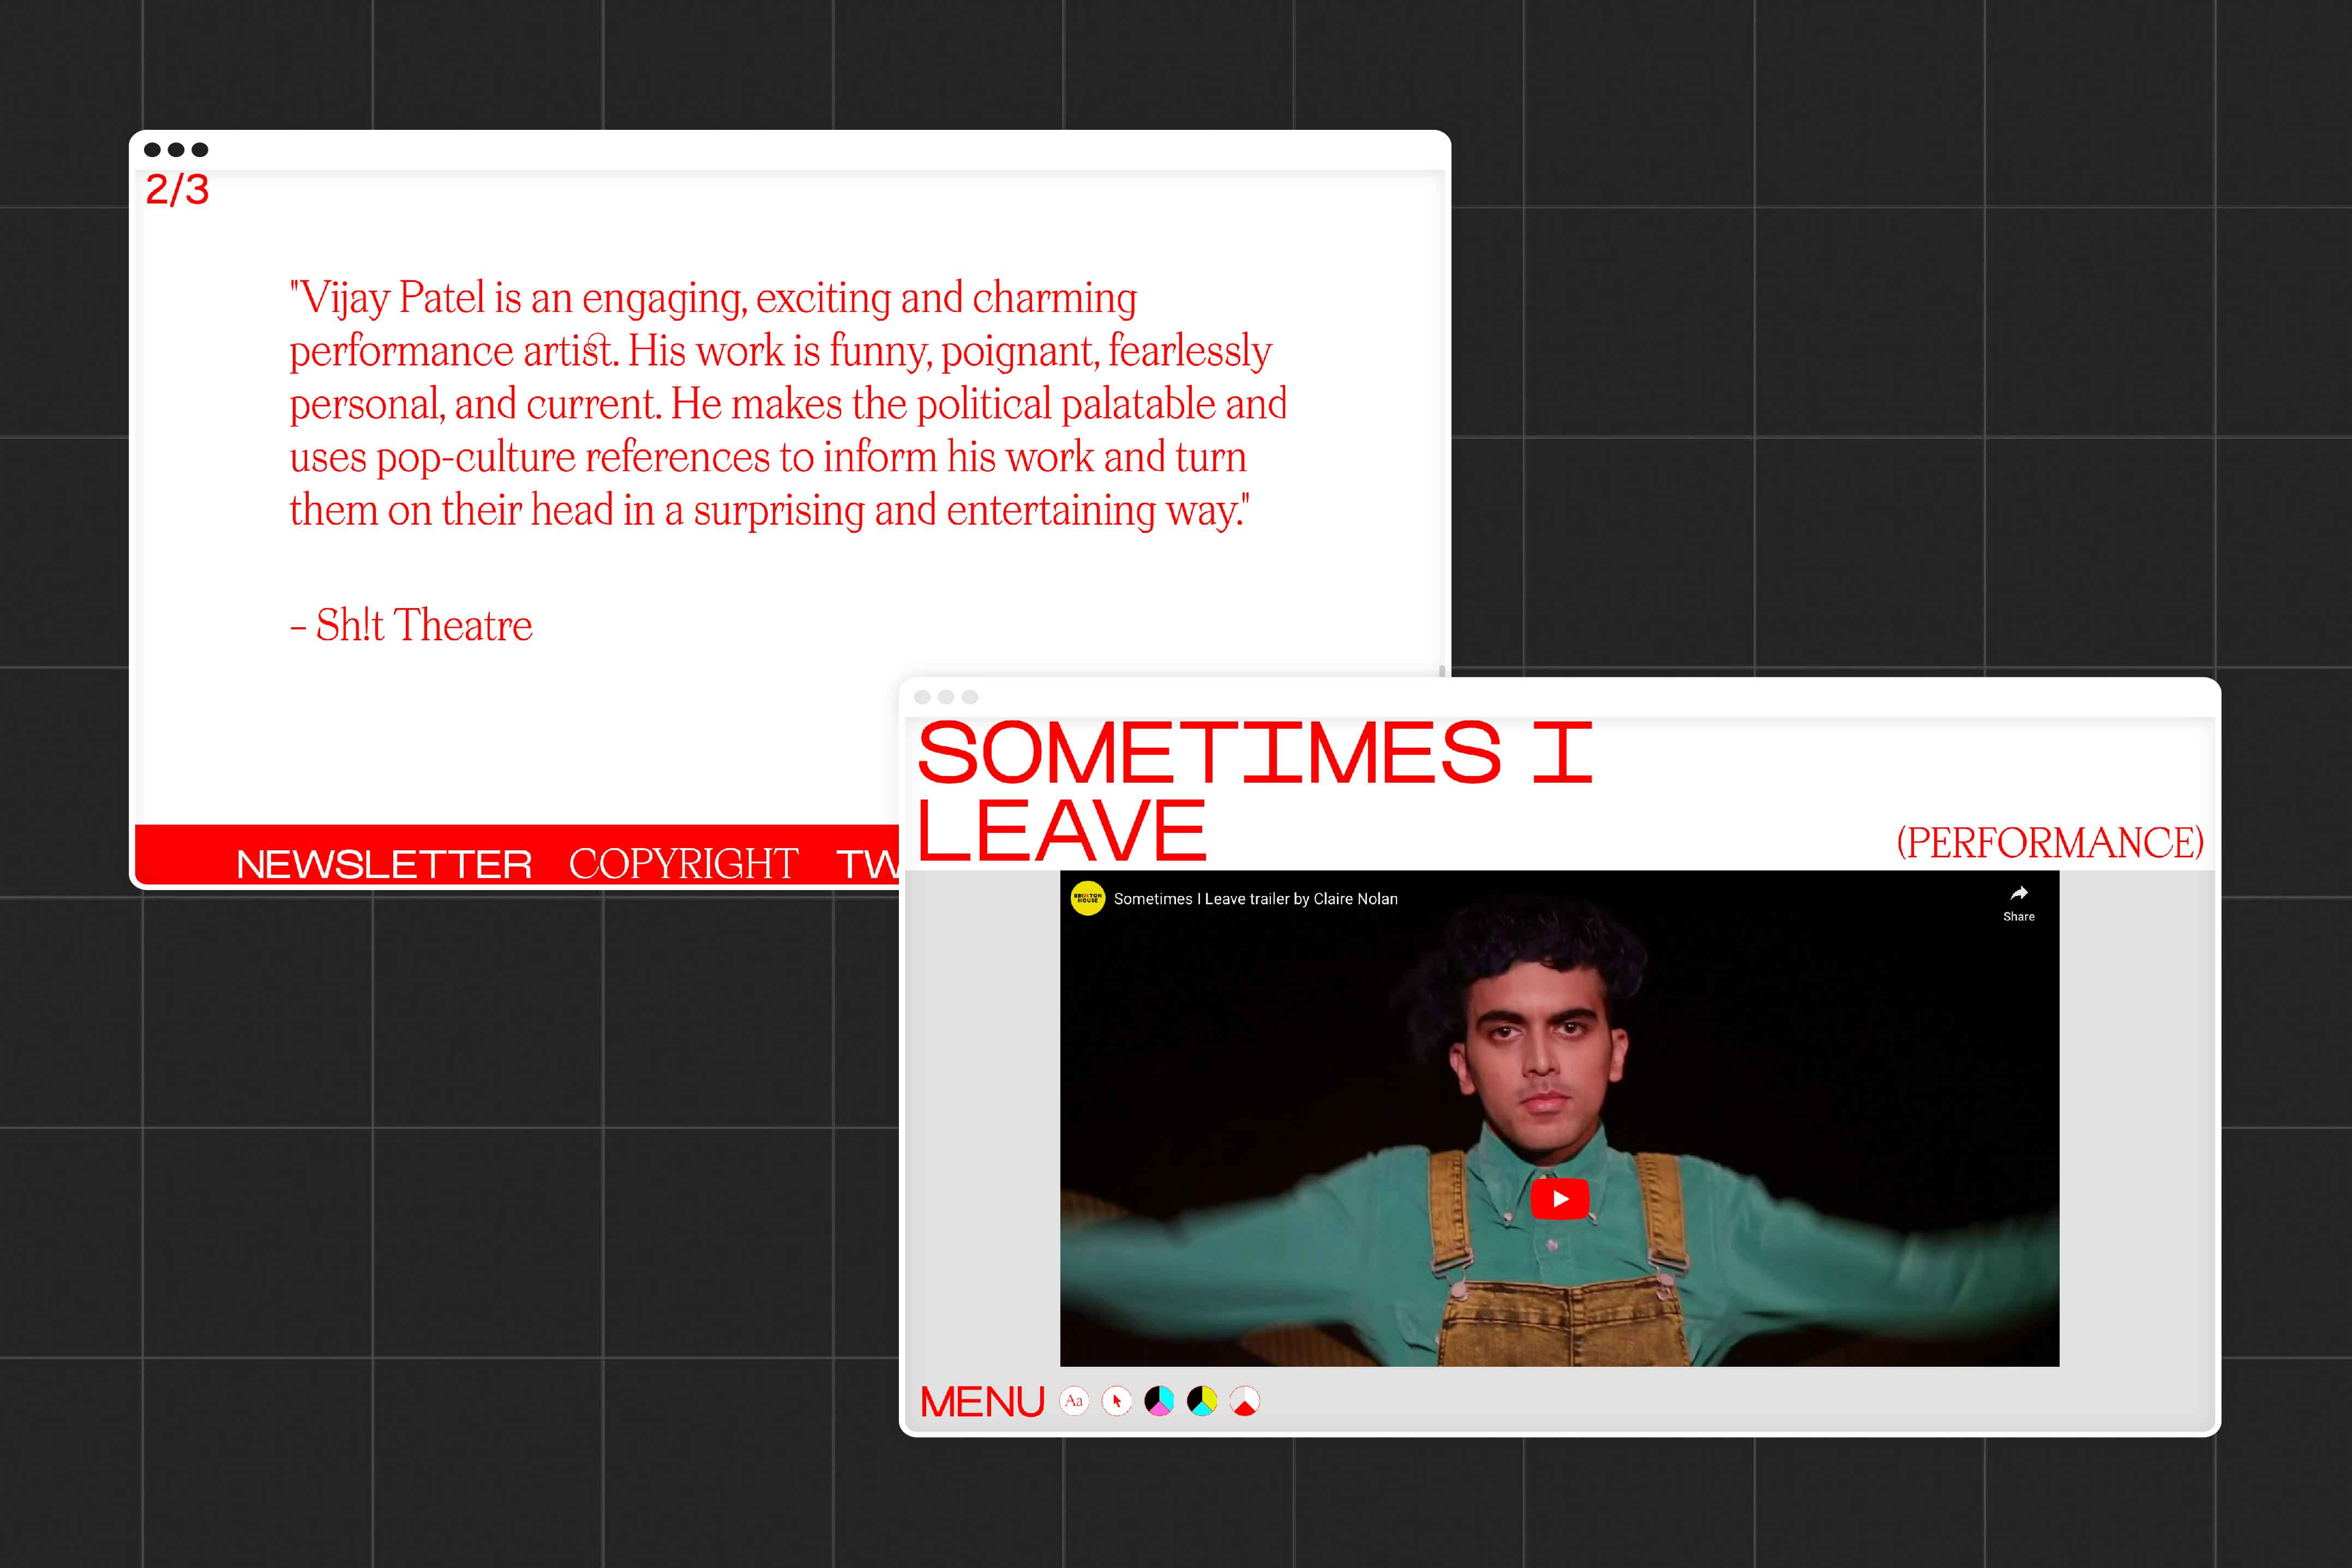 Image shows some of Vijay's reviews and a page for the 'Sometimes I Leave' performance